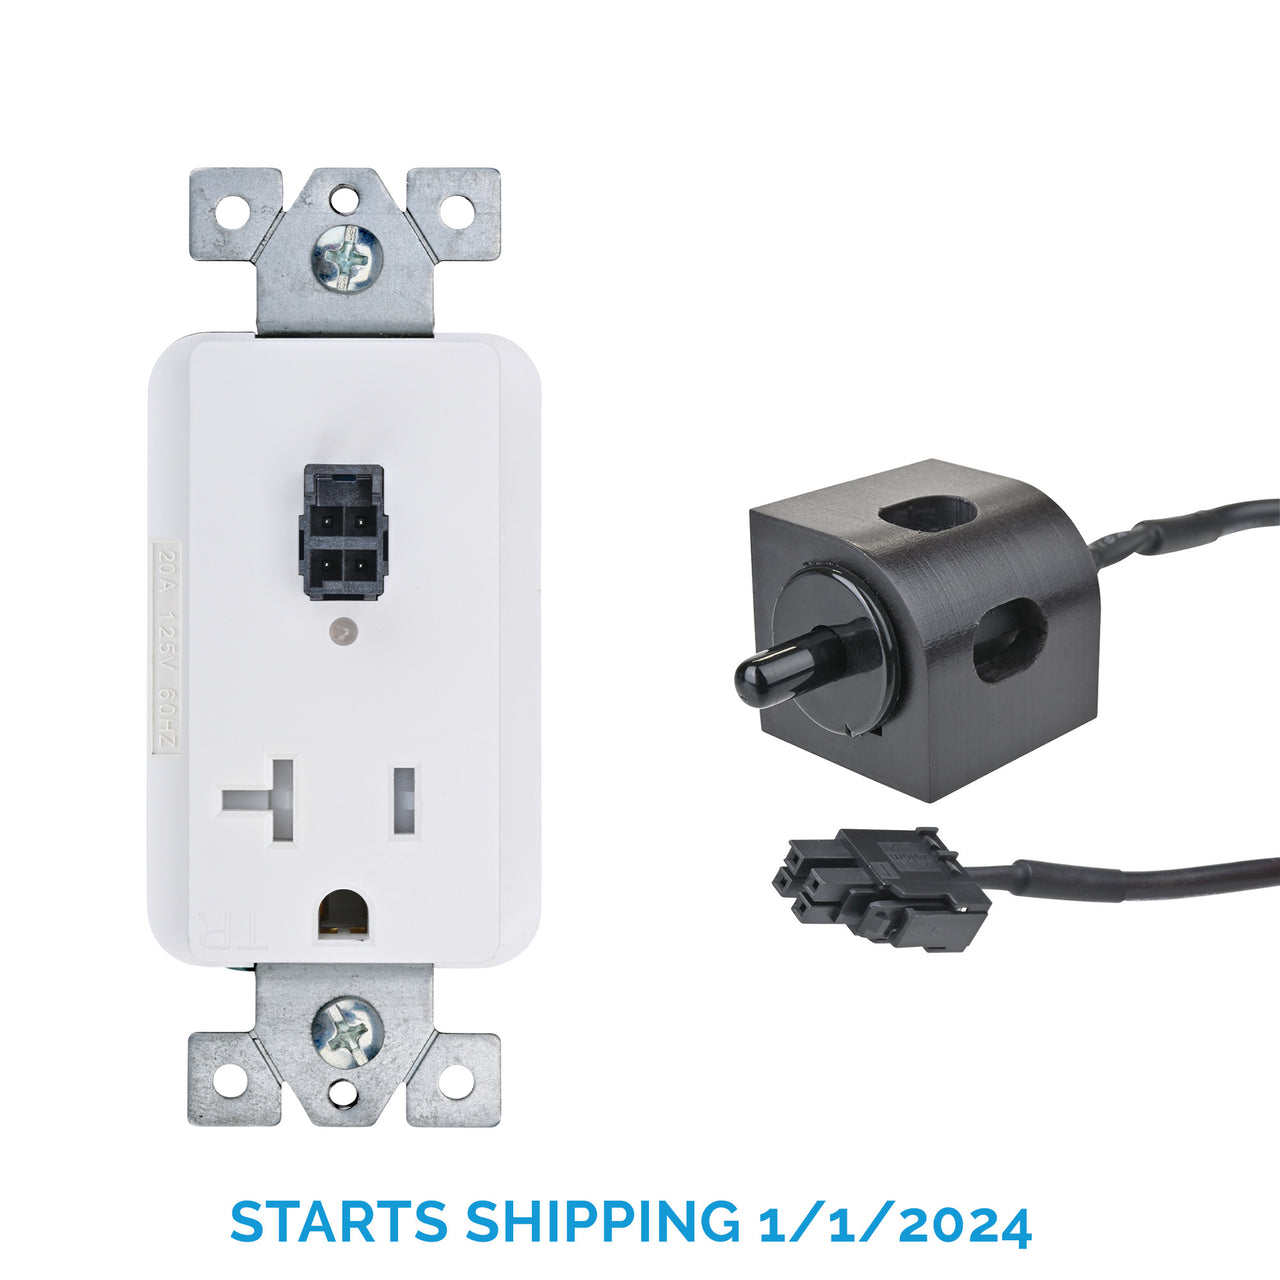 20 amp Safety Interlock Outlet with Corner Mount Limit Switch